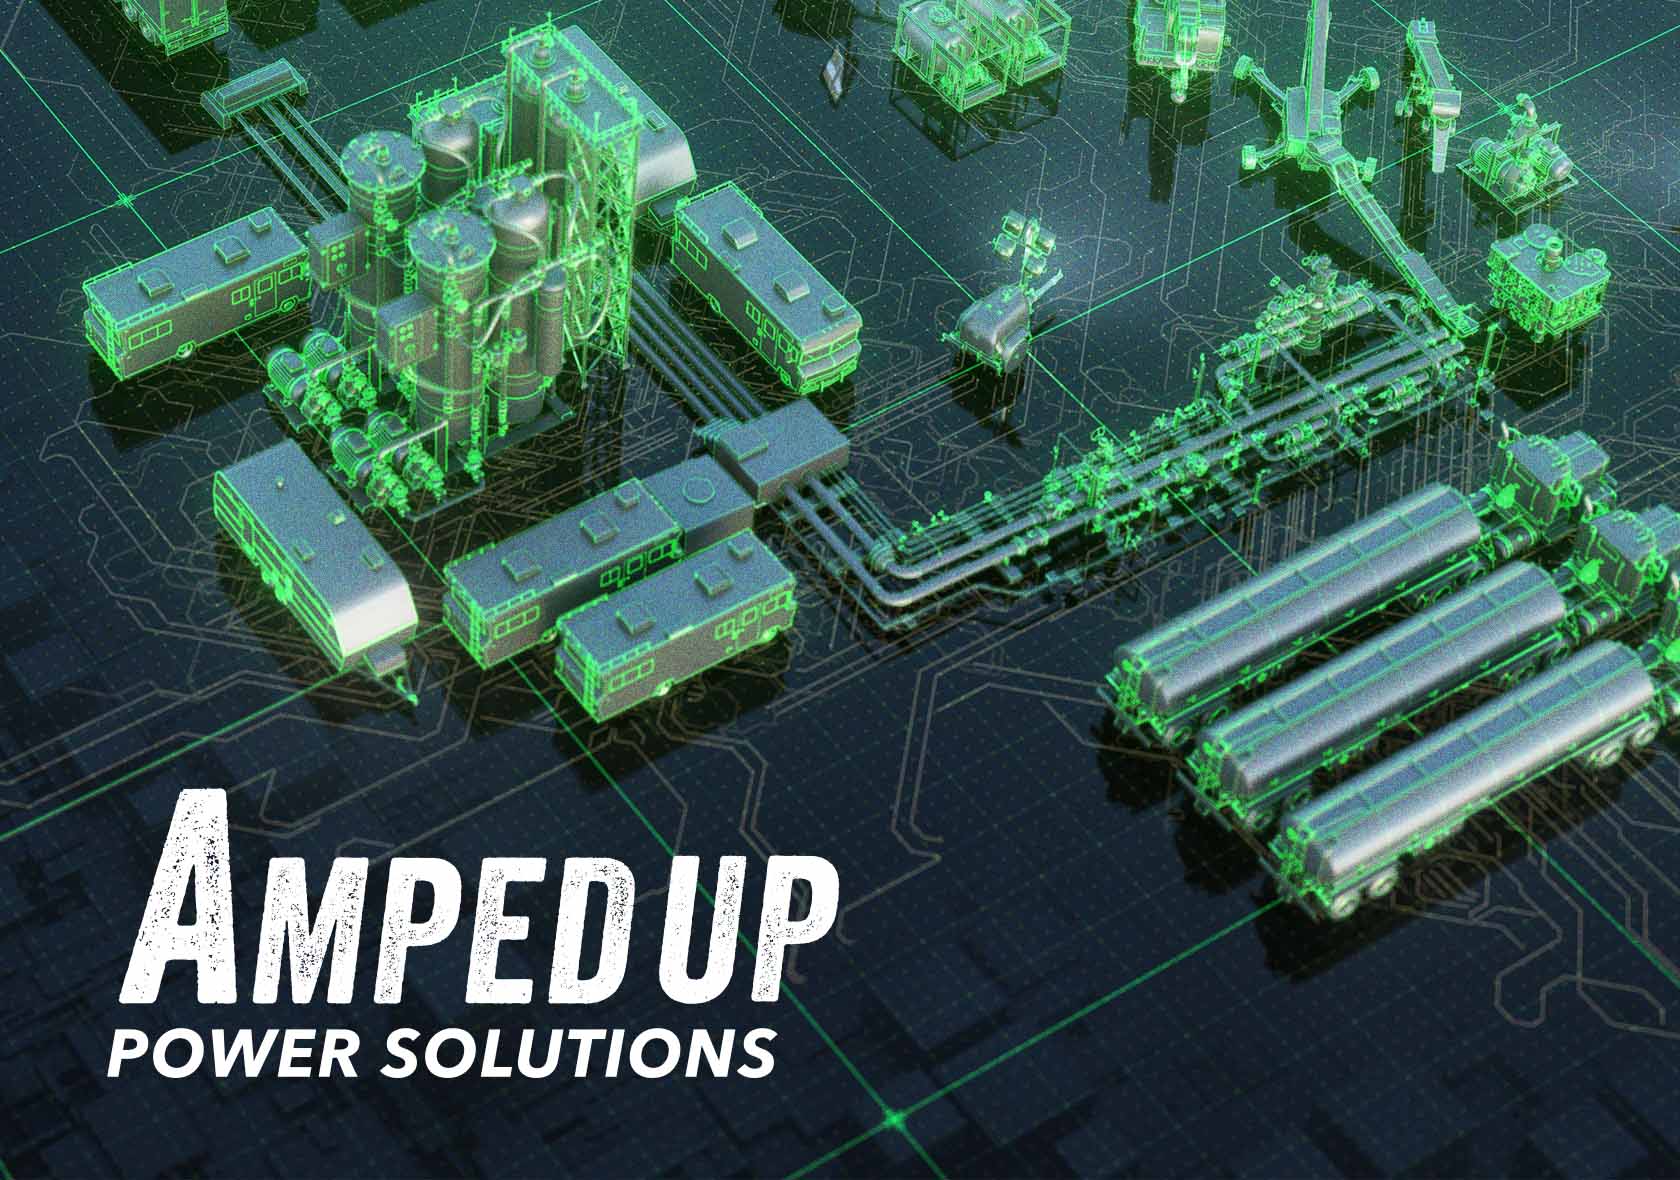 Amped Up: Company website interactive experience.